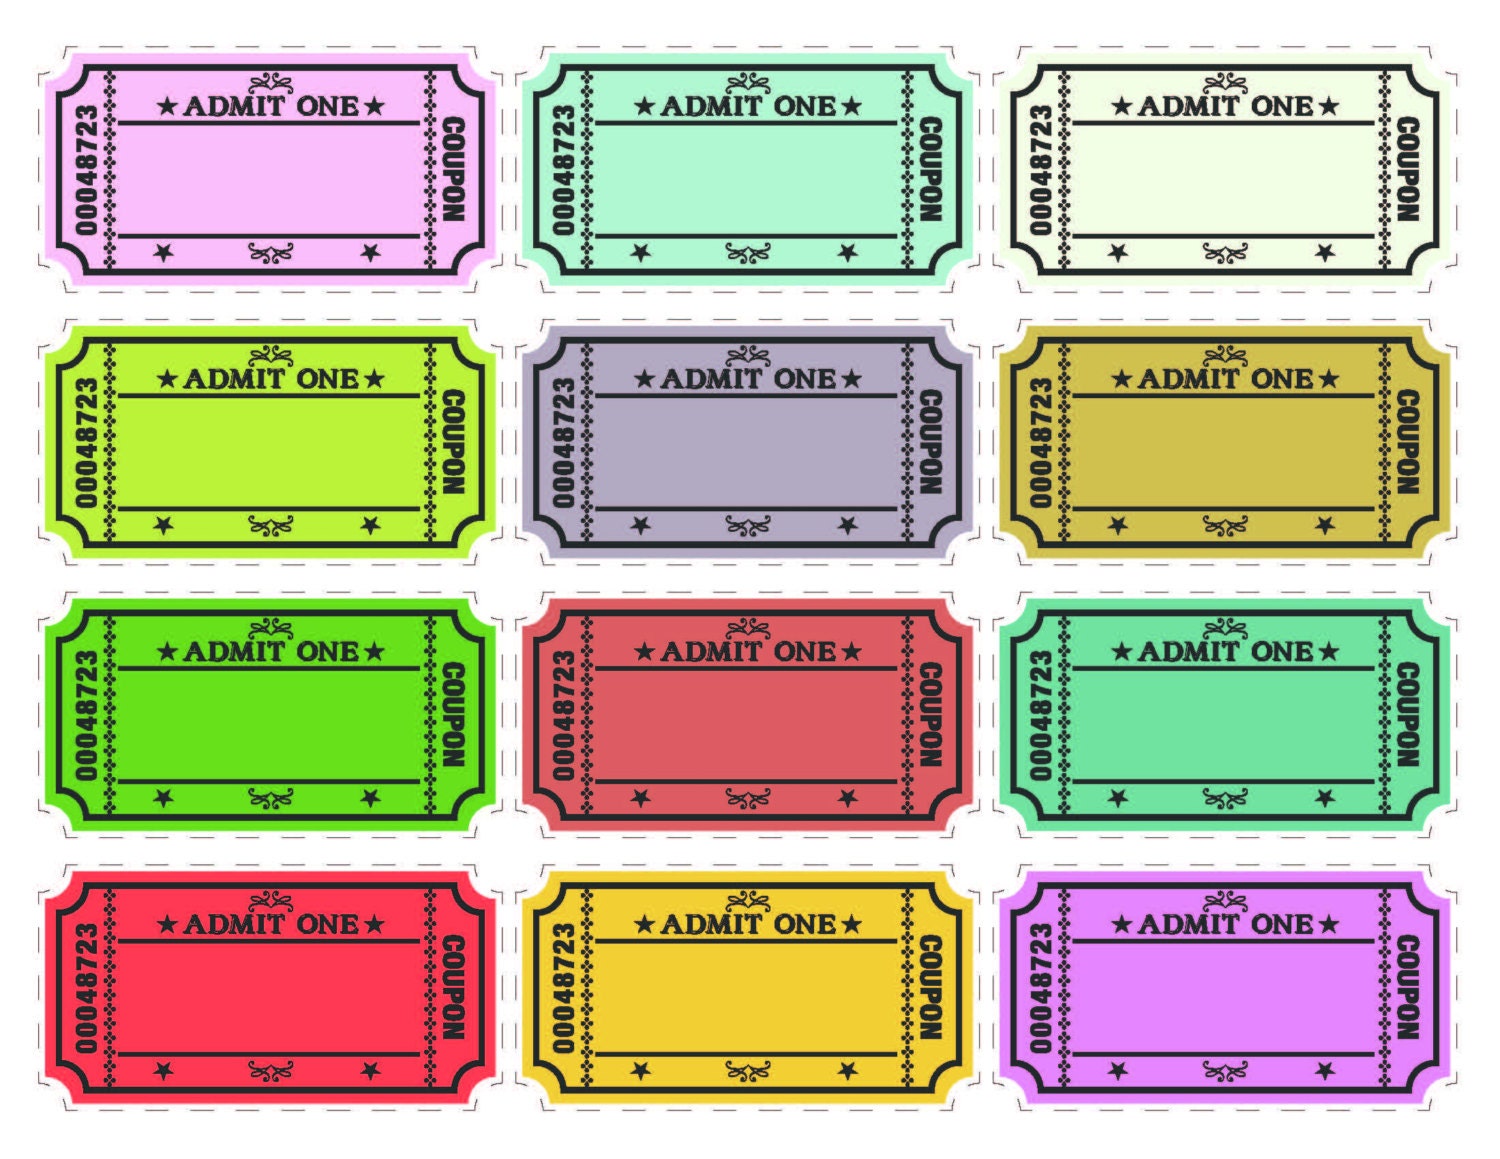 printable-kids-coupons-with-extra-blank-coupons-24-by-tvlbdesigns